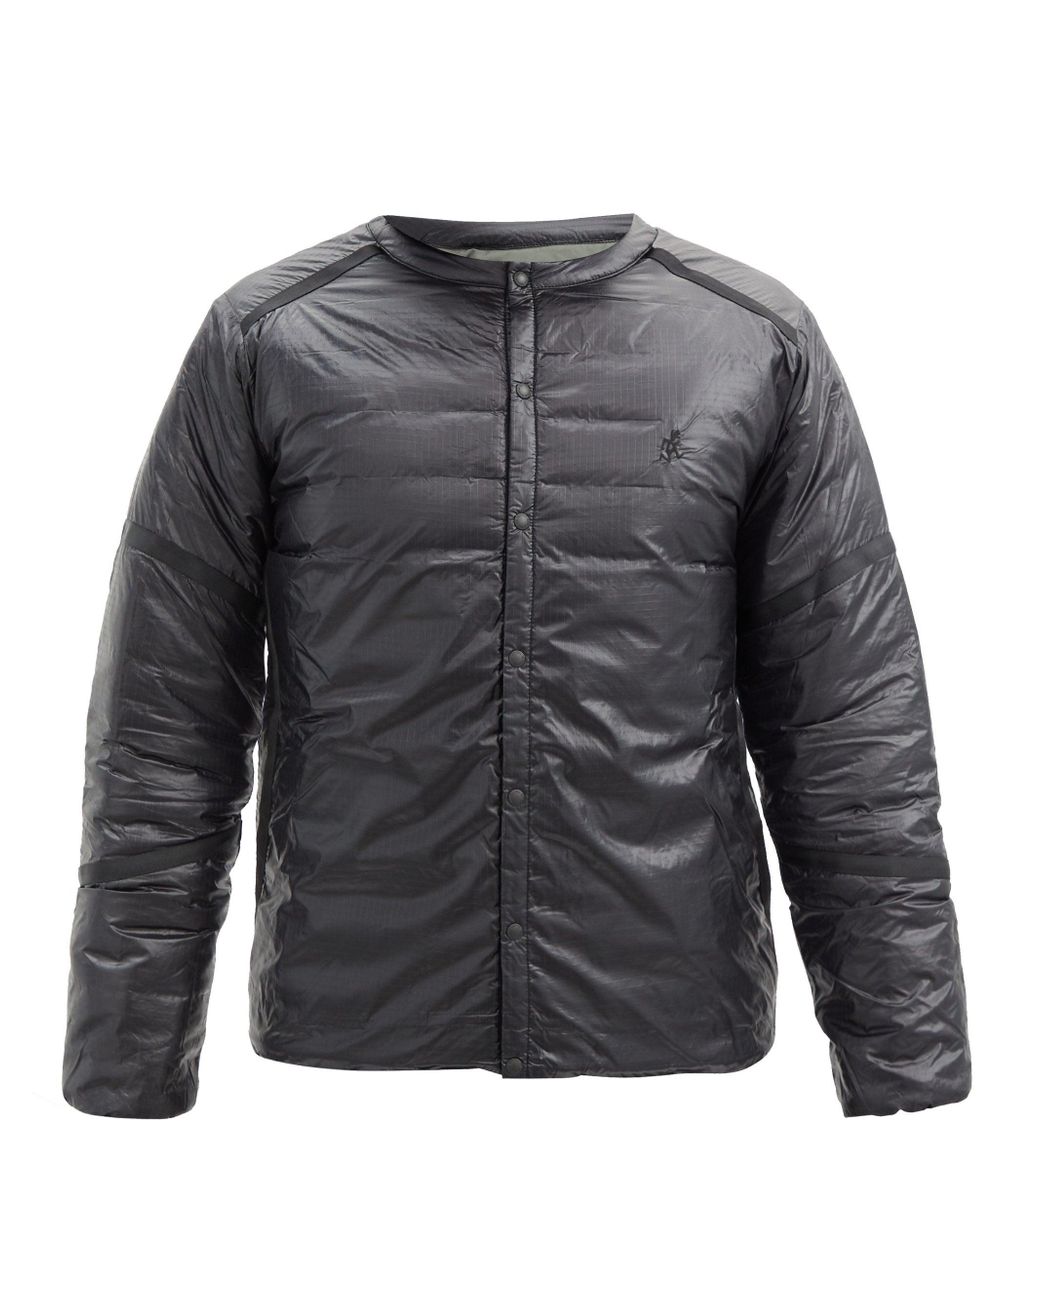 Gramicci Synthetic Reversible Ripstop-shell Jacket in Black for Men - Lyst